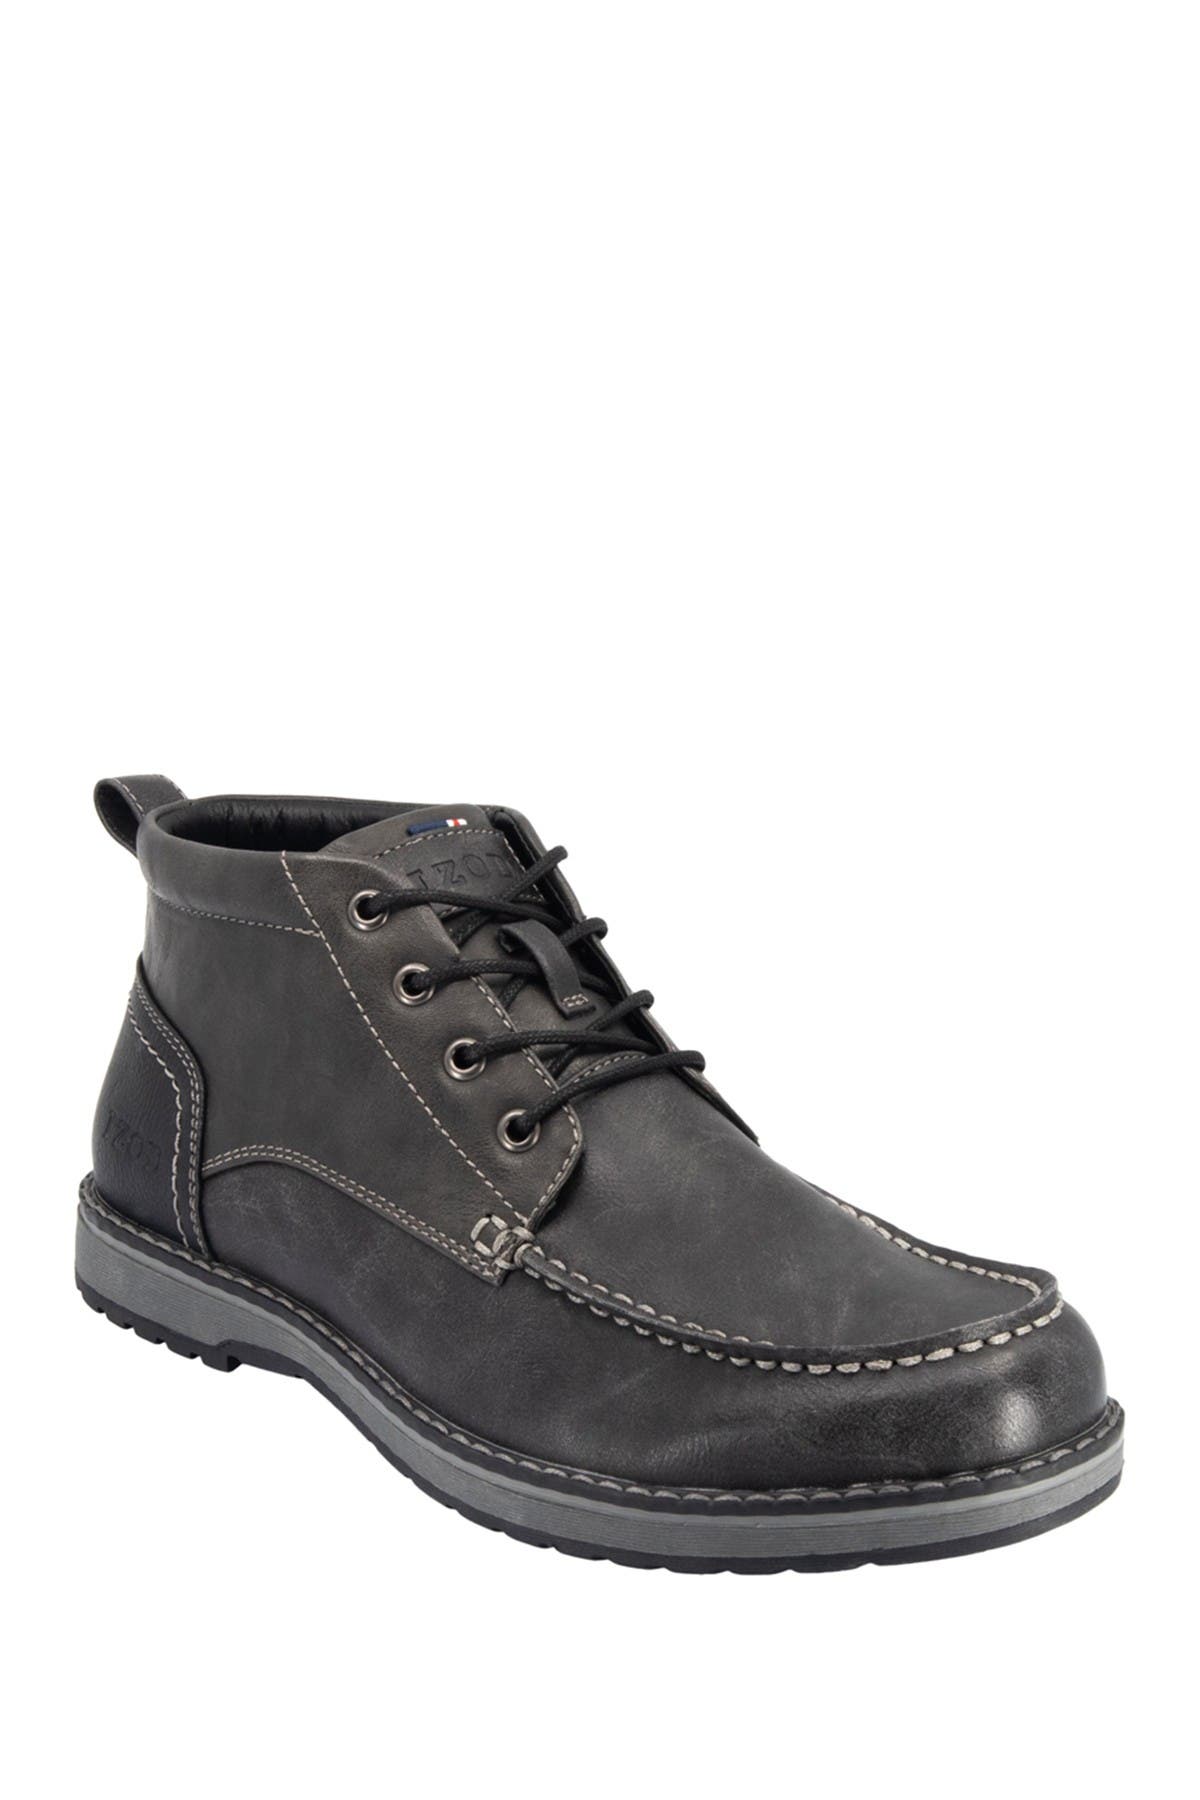 Izod Landry Casual Boot In Charcoal